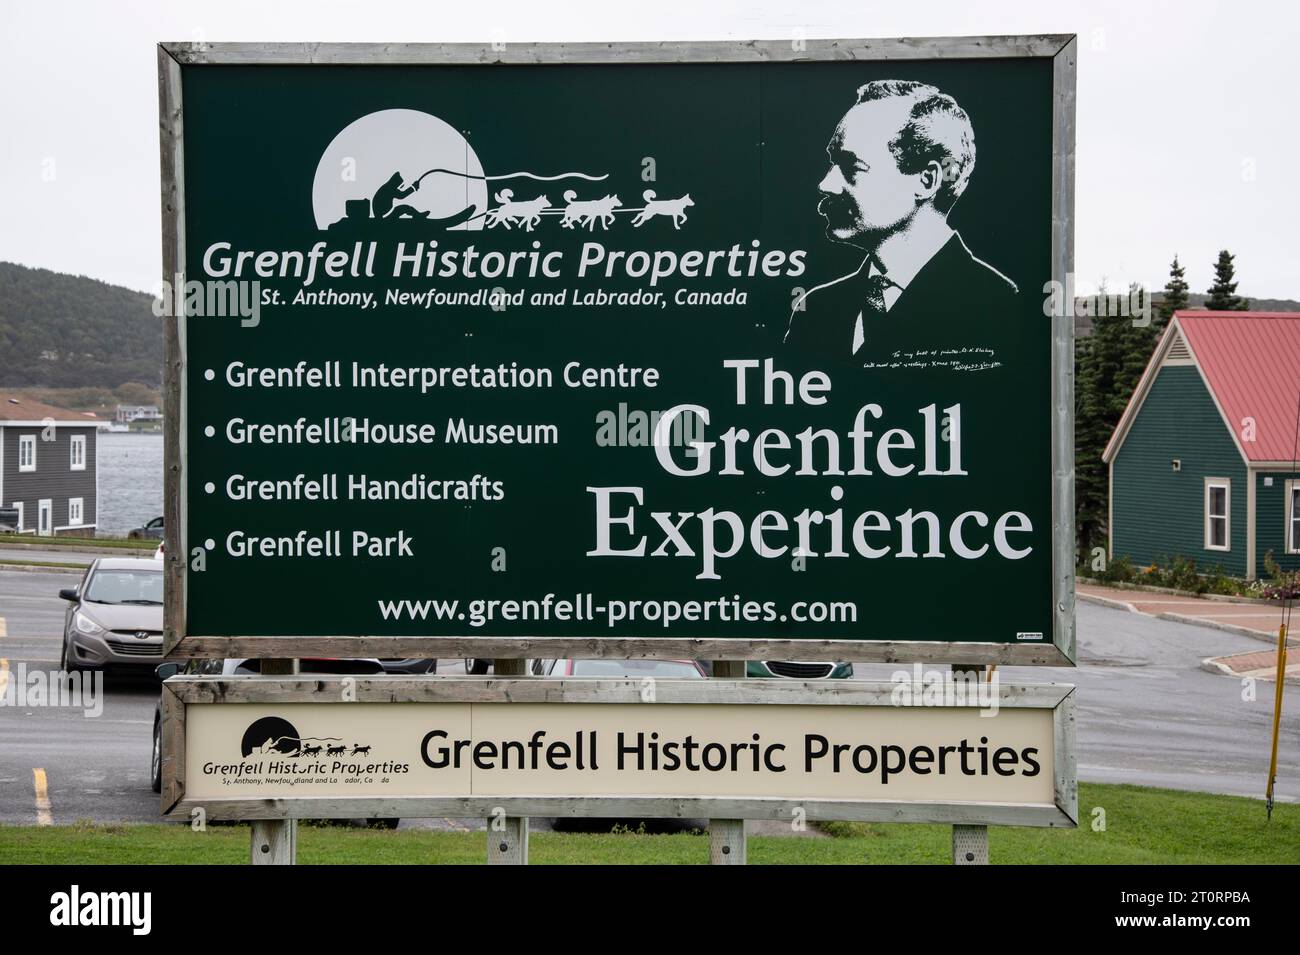 Insegna Grenfell Historic Properties a St. Anthony, Newfoundland & Labrador, Canada Foto Stock